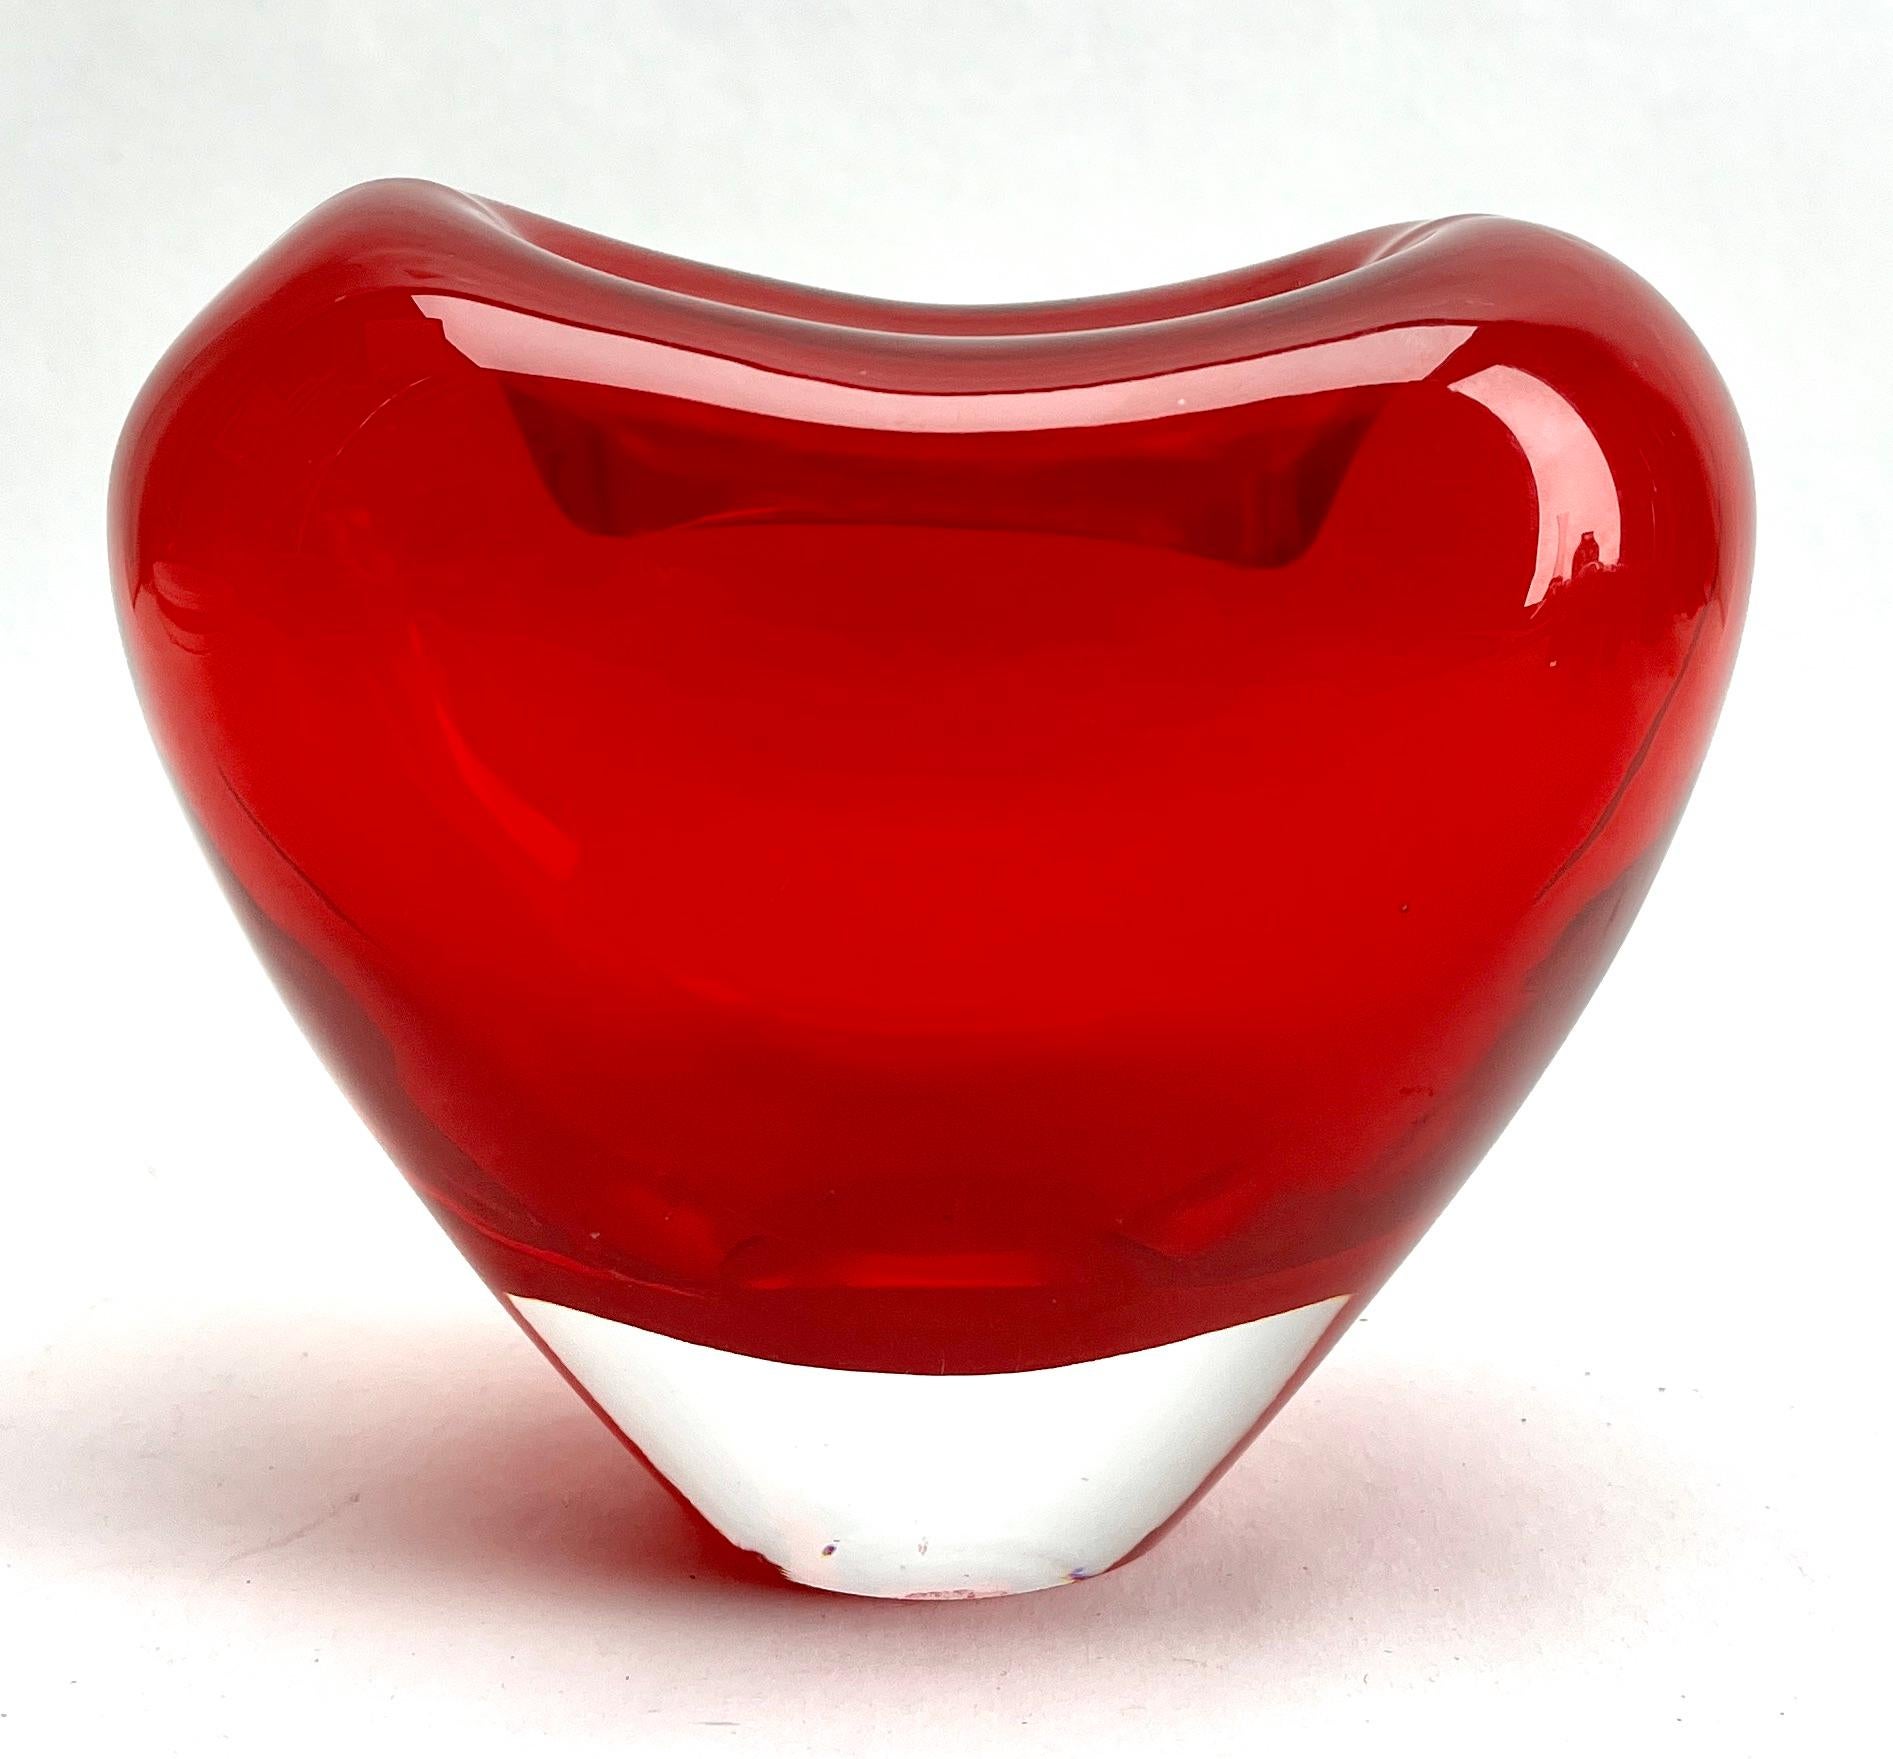 Late 20th Century Heart-shaped vase. Salviati collection, designed by Maria Christina Hamel. 